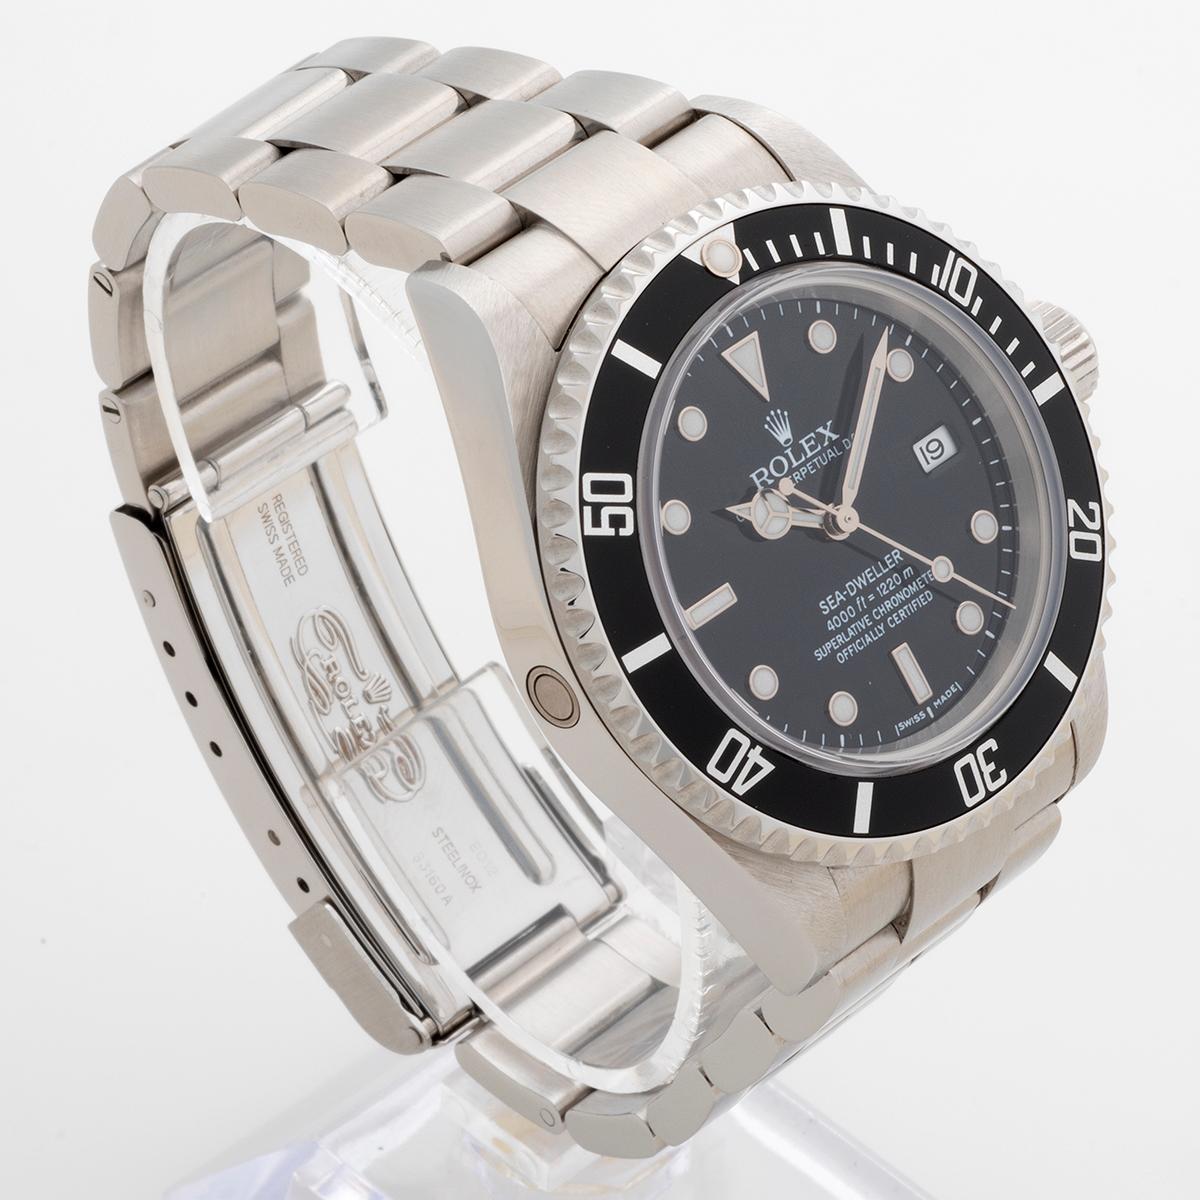 Rolex Seadweller Wristwatch Ref 16600 / 16600t. Full Set. Yr 2007/2008 In Excellent Condition For Sale In Canterbury, GB